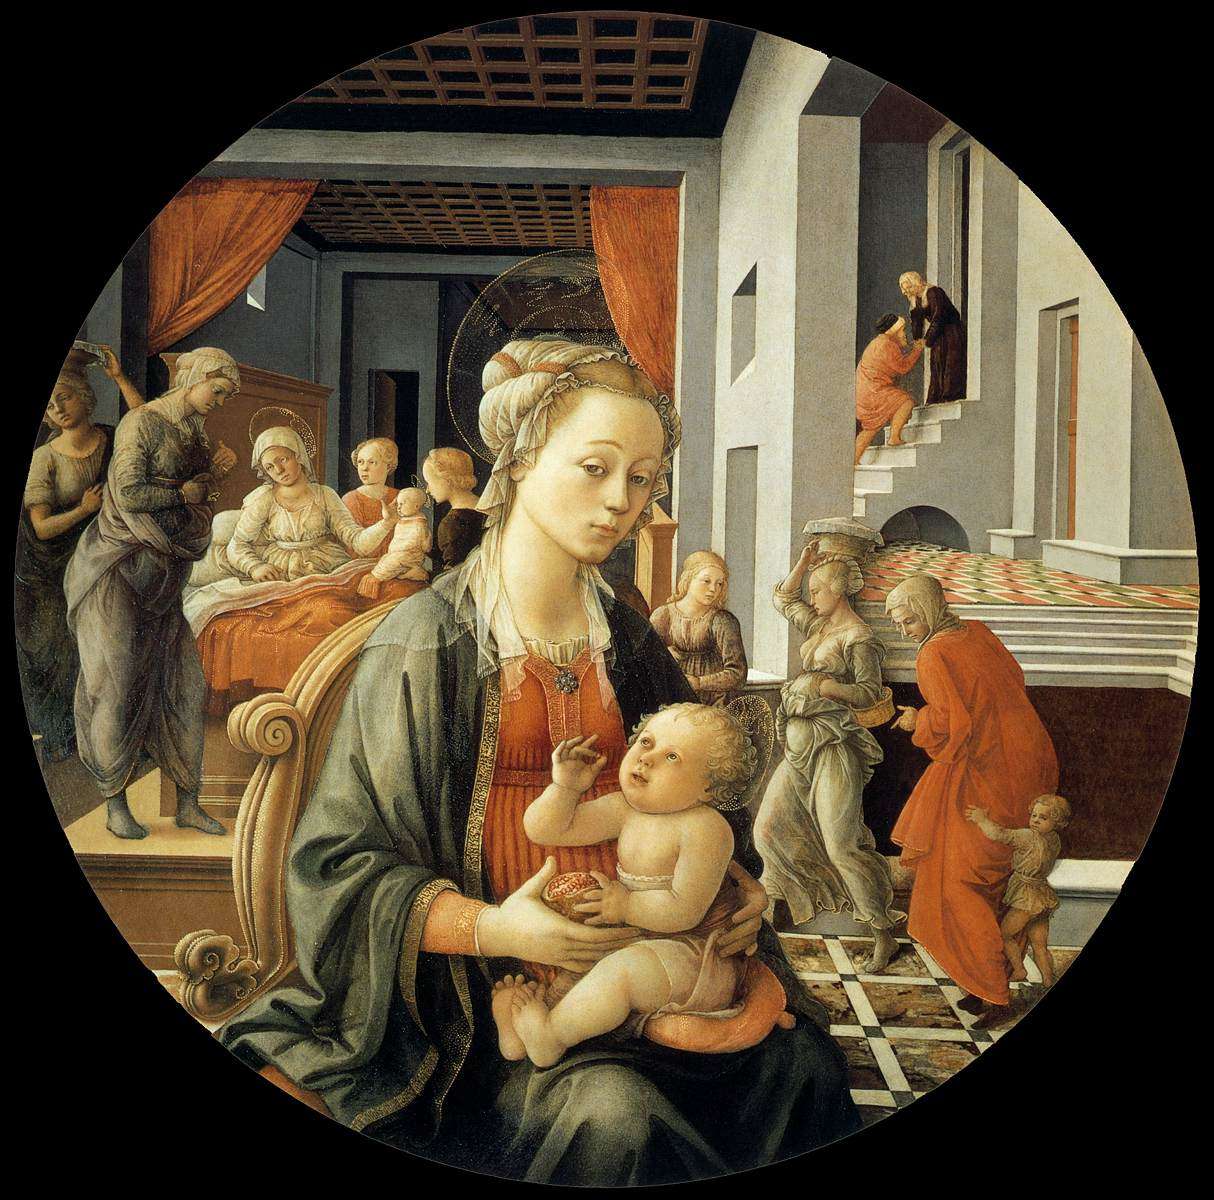 Filippo Lippi, Madonna and Child With Scenes from the Life of St. Anne Italian, 1452 Florence, Pitti Palace